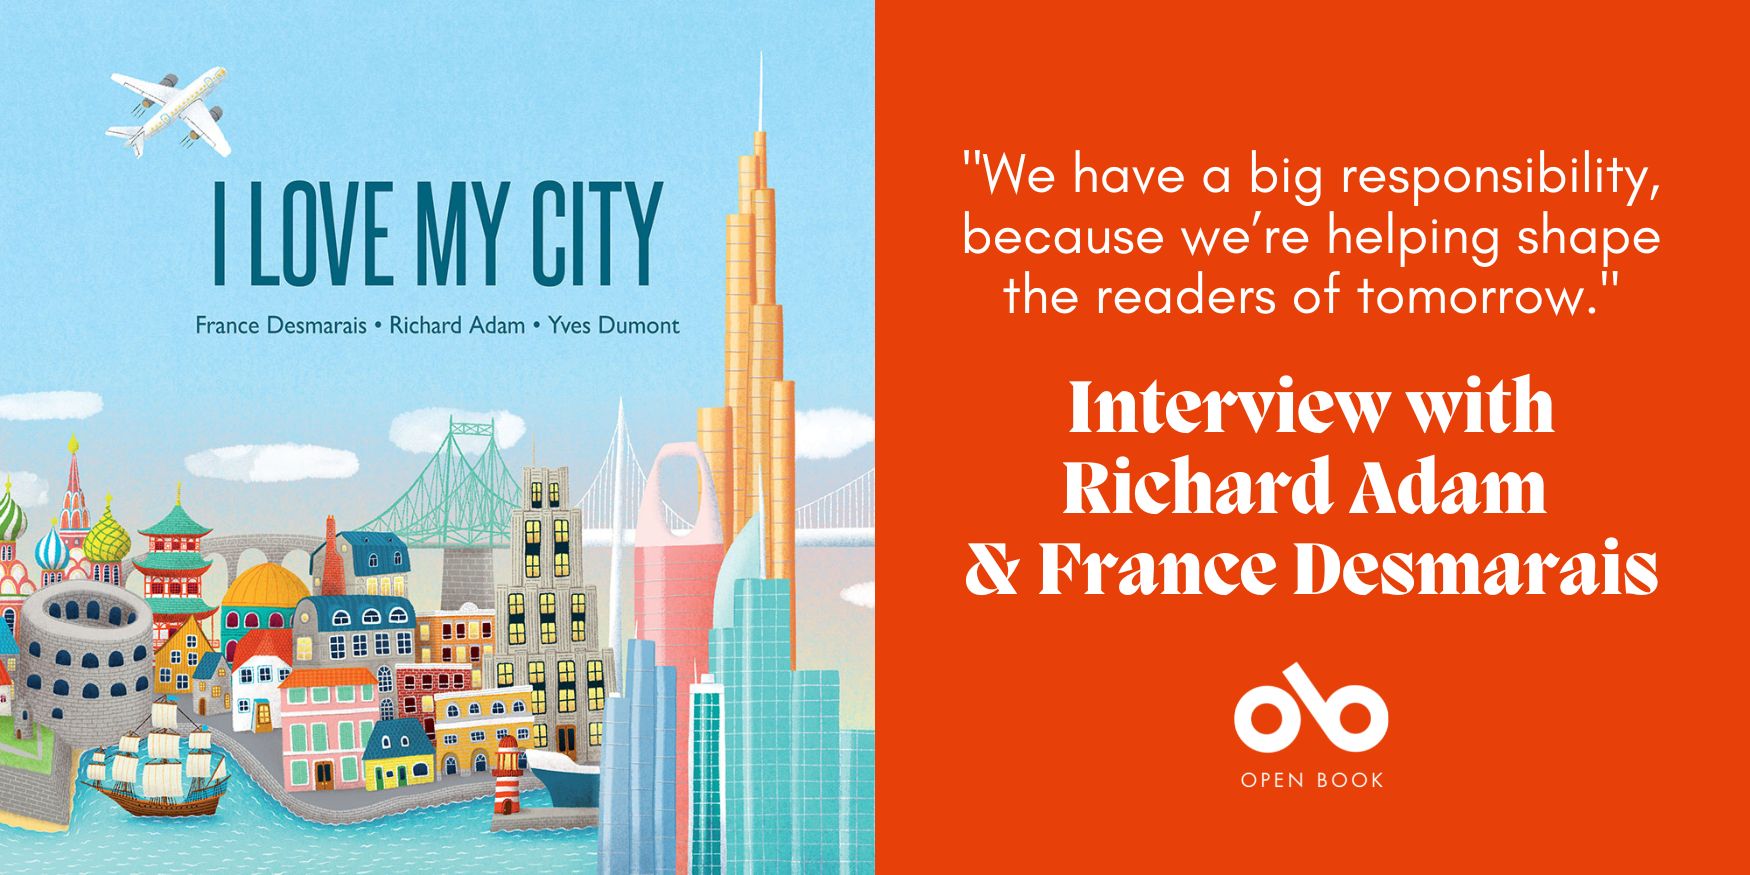 image of the book We Love Cities beside an orange background with white text reading "we have a big responsibility, because we’re helping shape the readers of tomorrow. Interview with Richard Adam & France Desmarais"